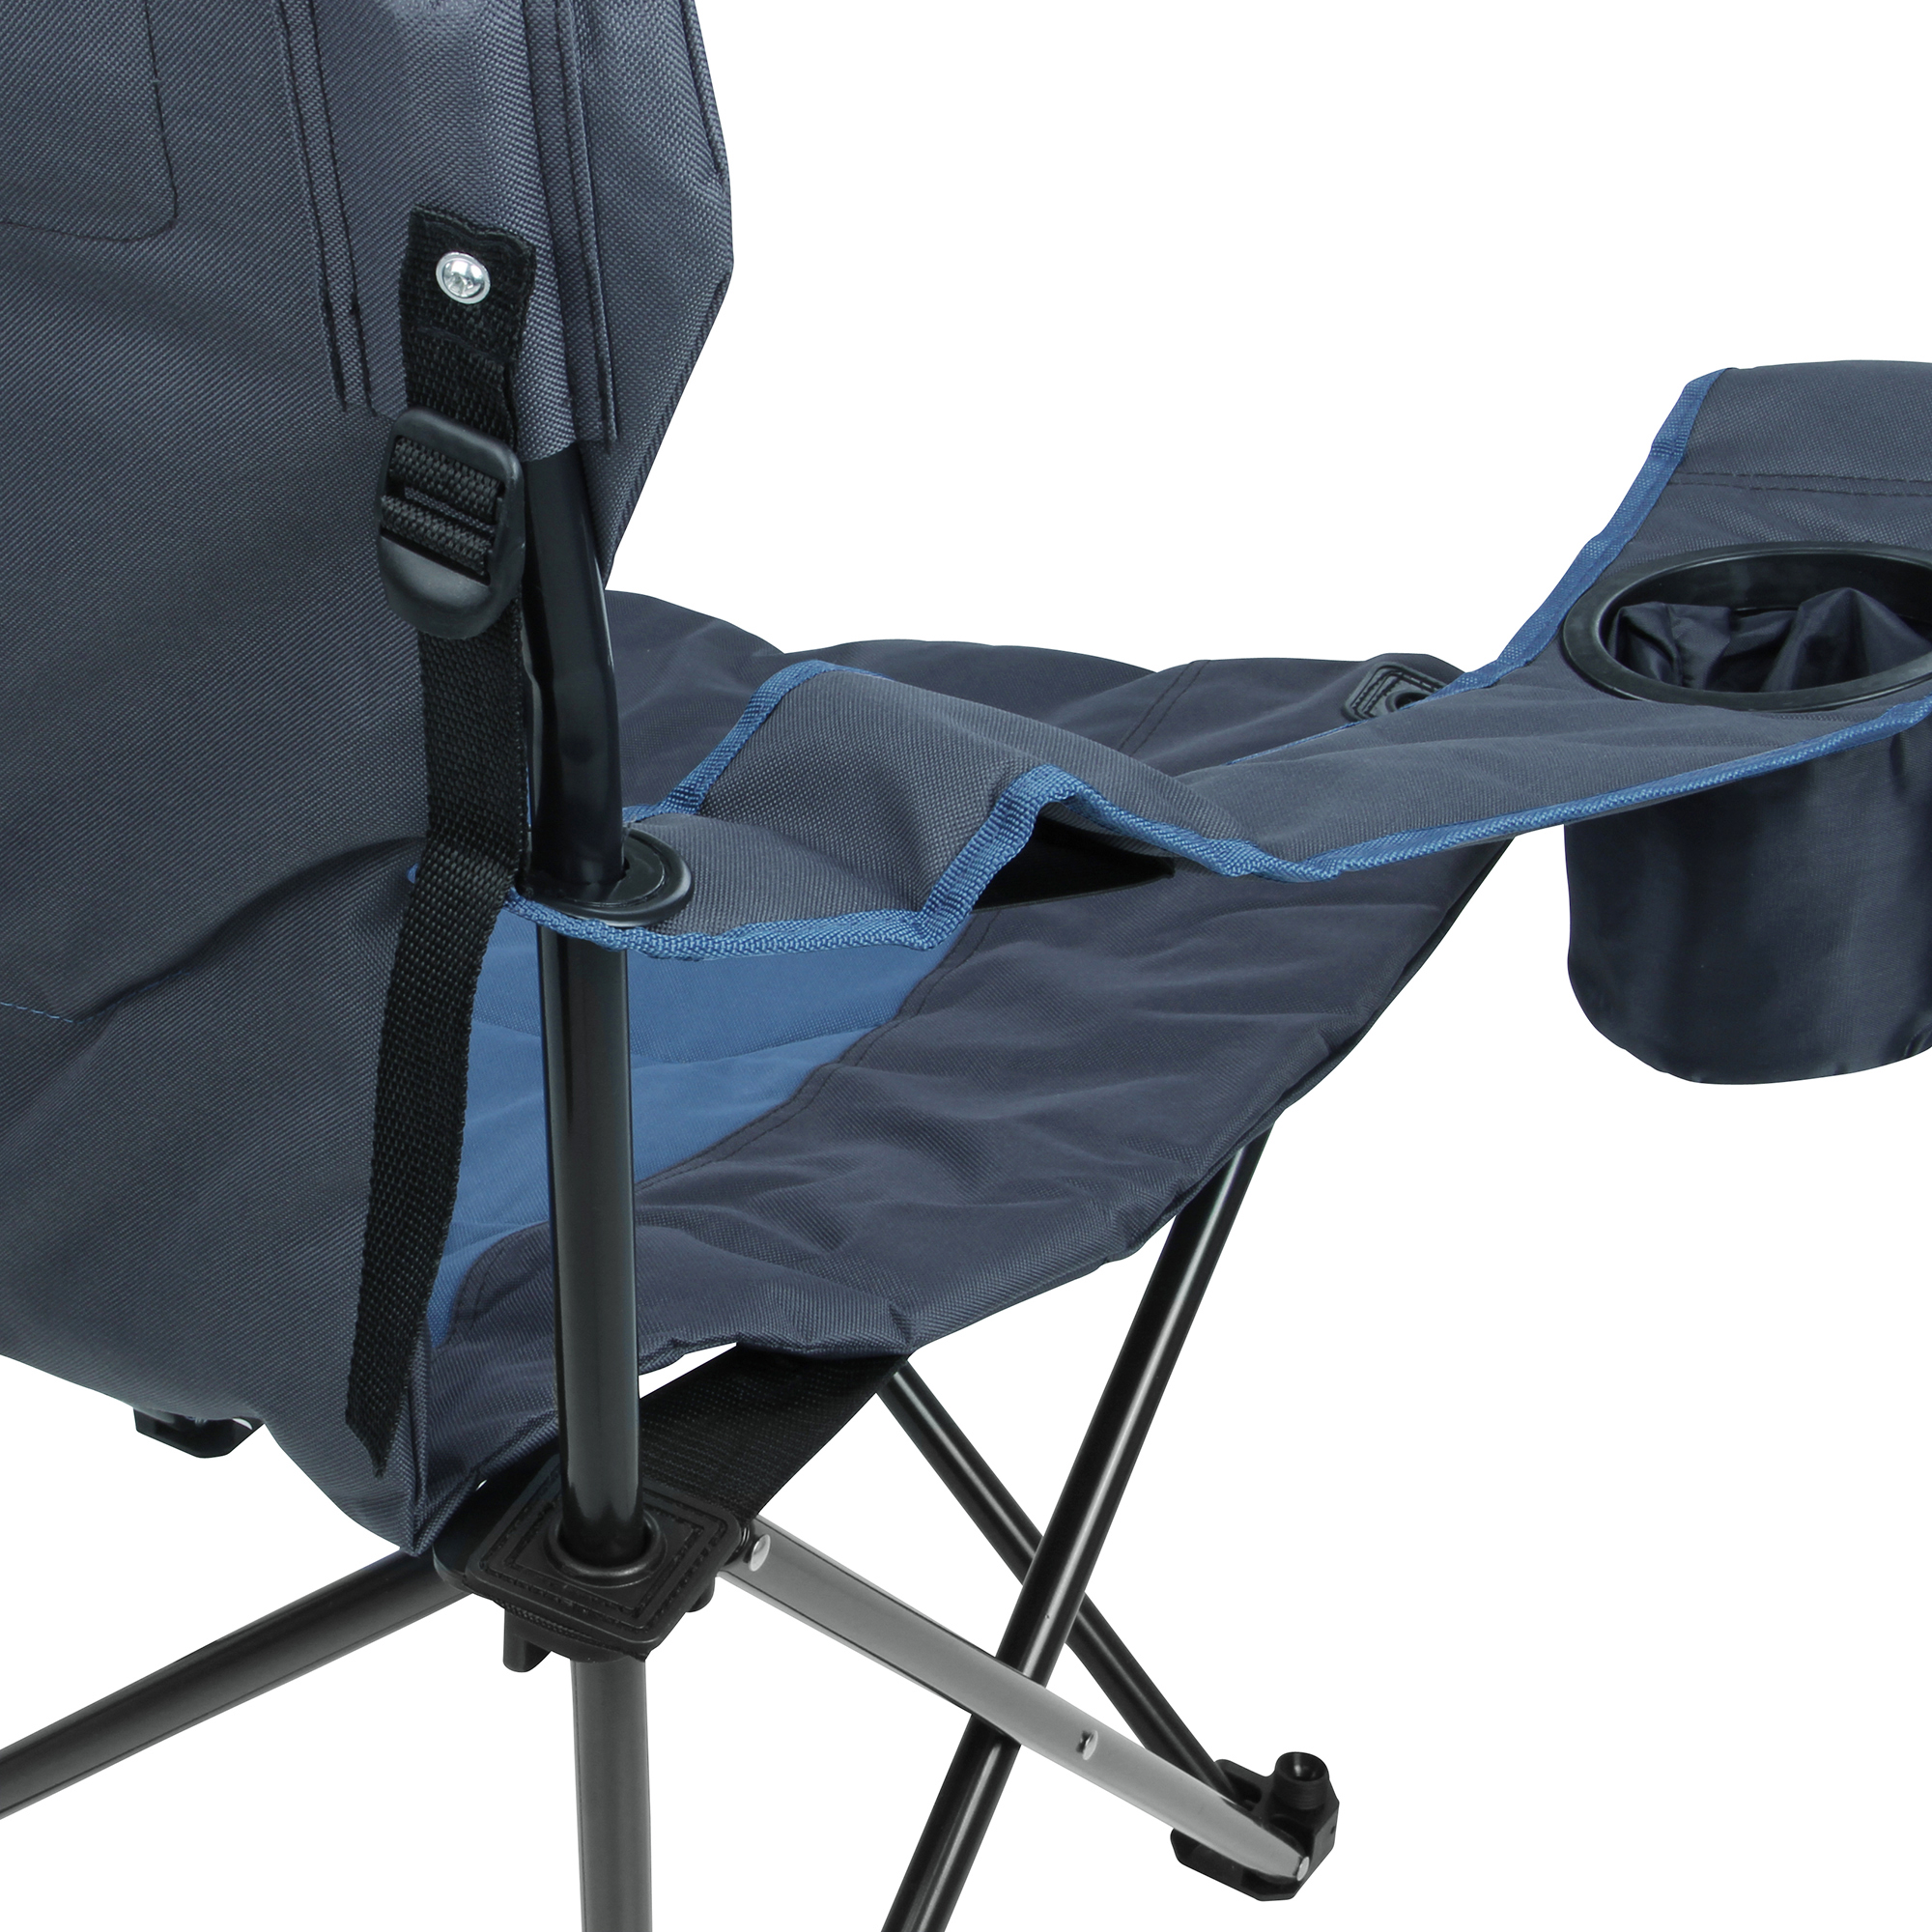 yourGEAR camping chair Pineto with footrest, adjustable backrest